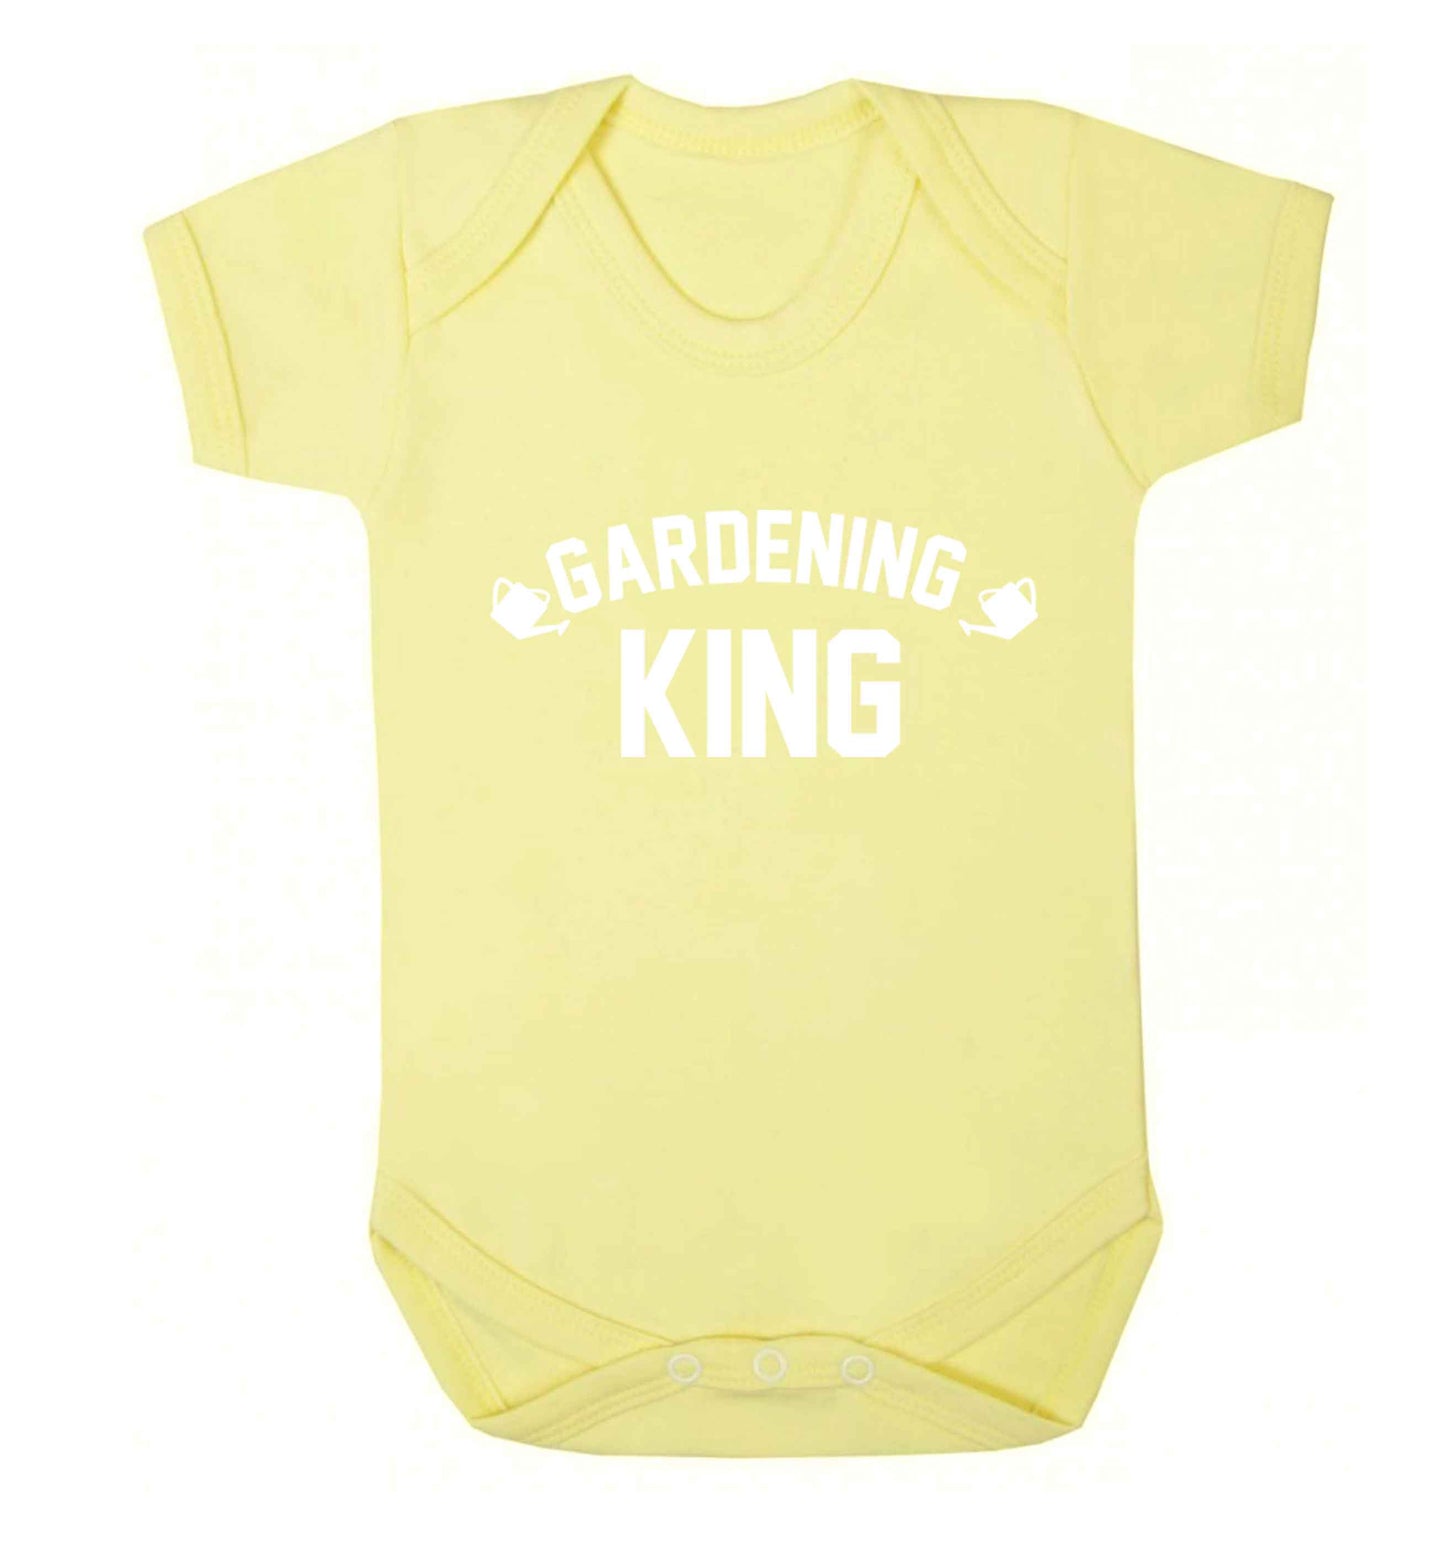 Gardening king Baby Vest pale yellow 18-24 months